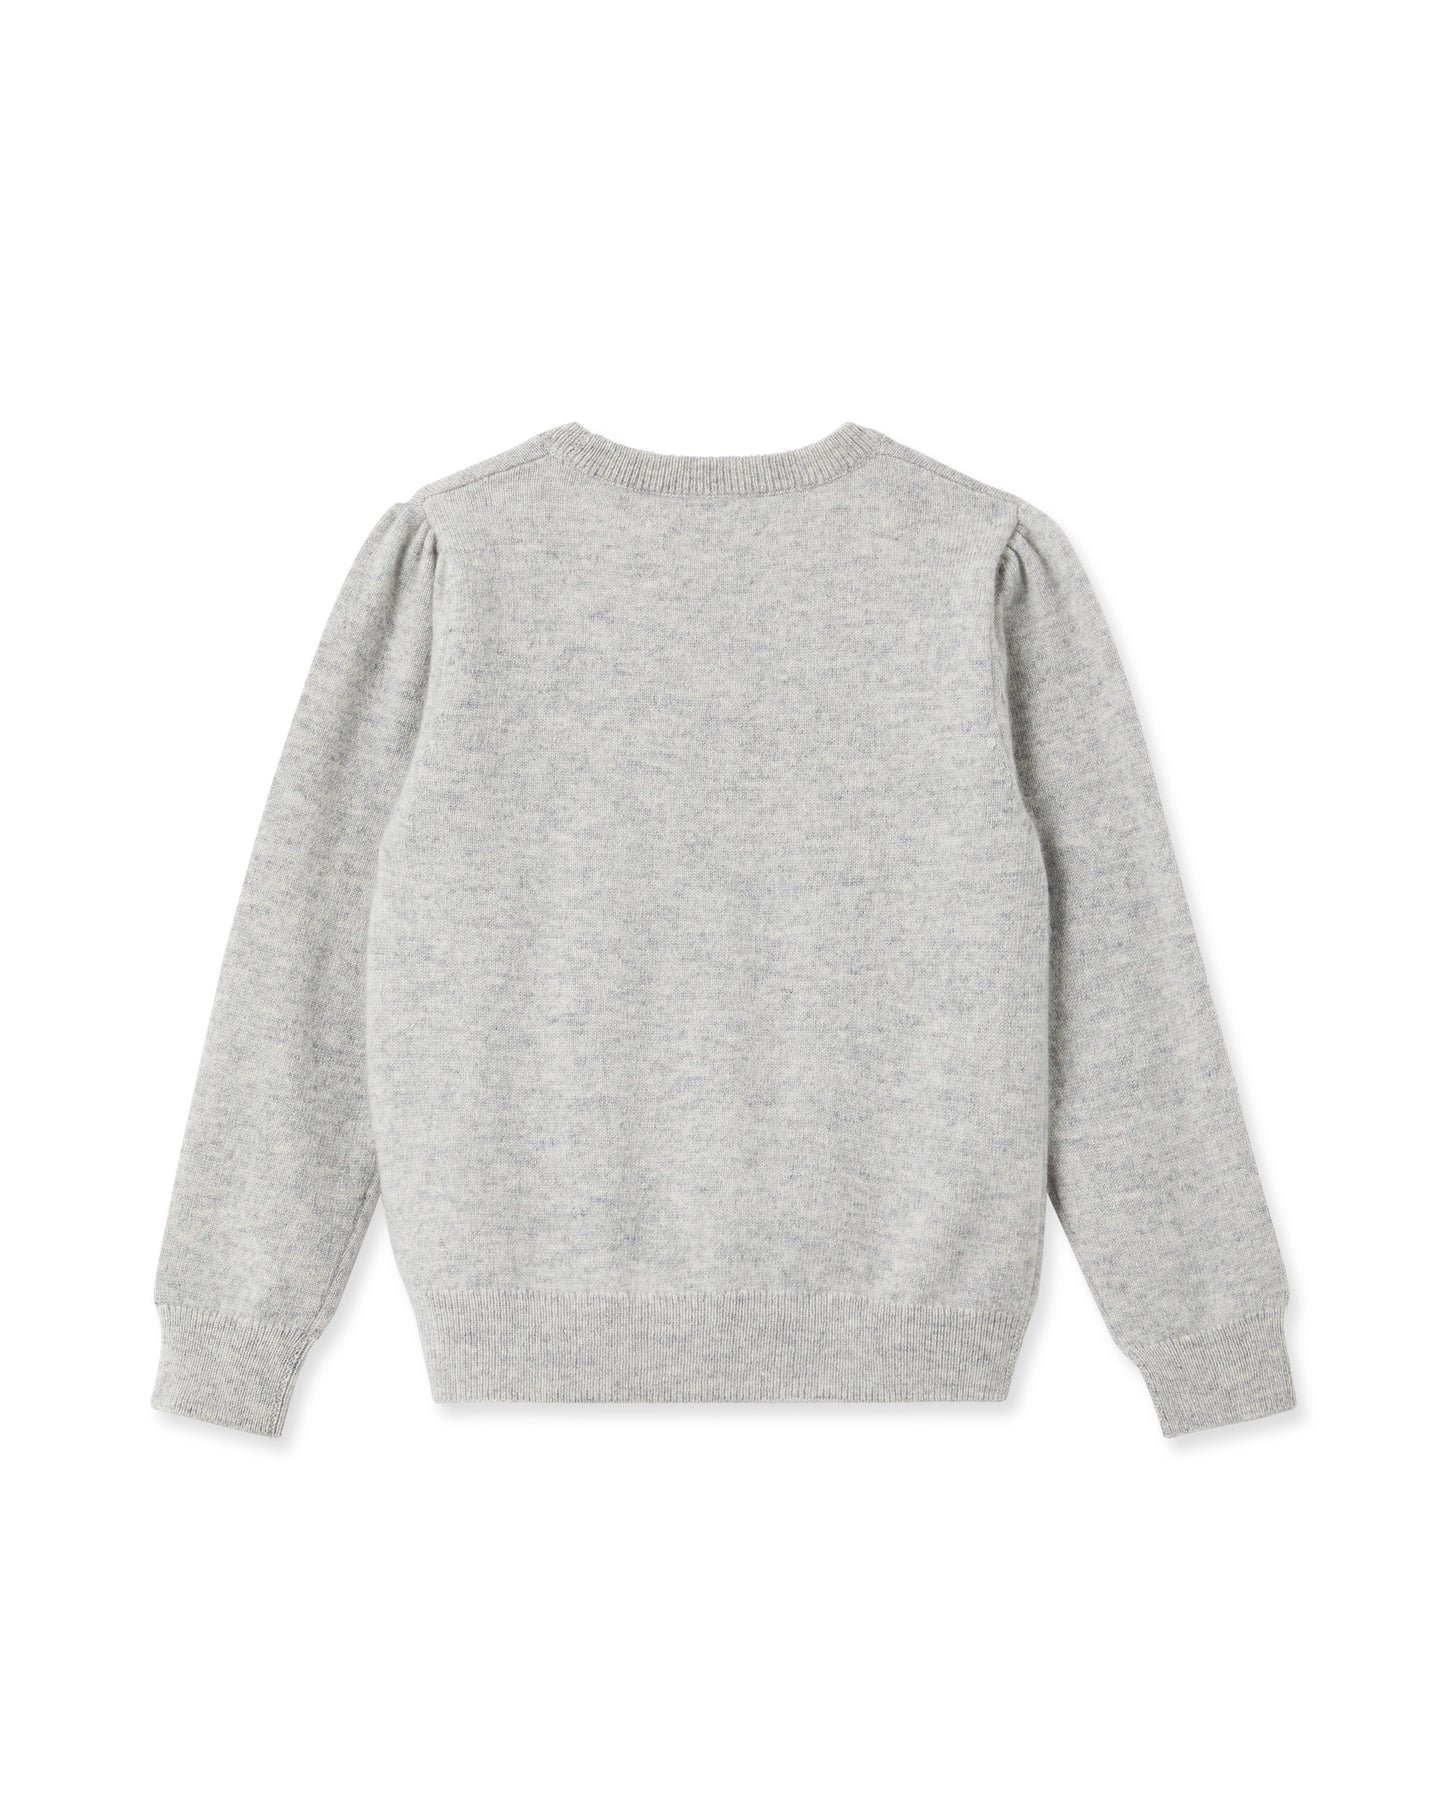 N.Peal Girls Round Neck Cashmere Sweater Fumo Grey New Ivory White